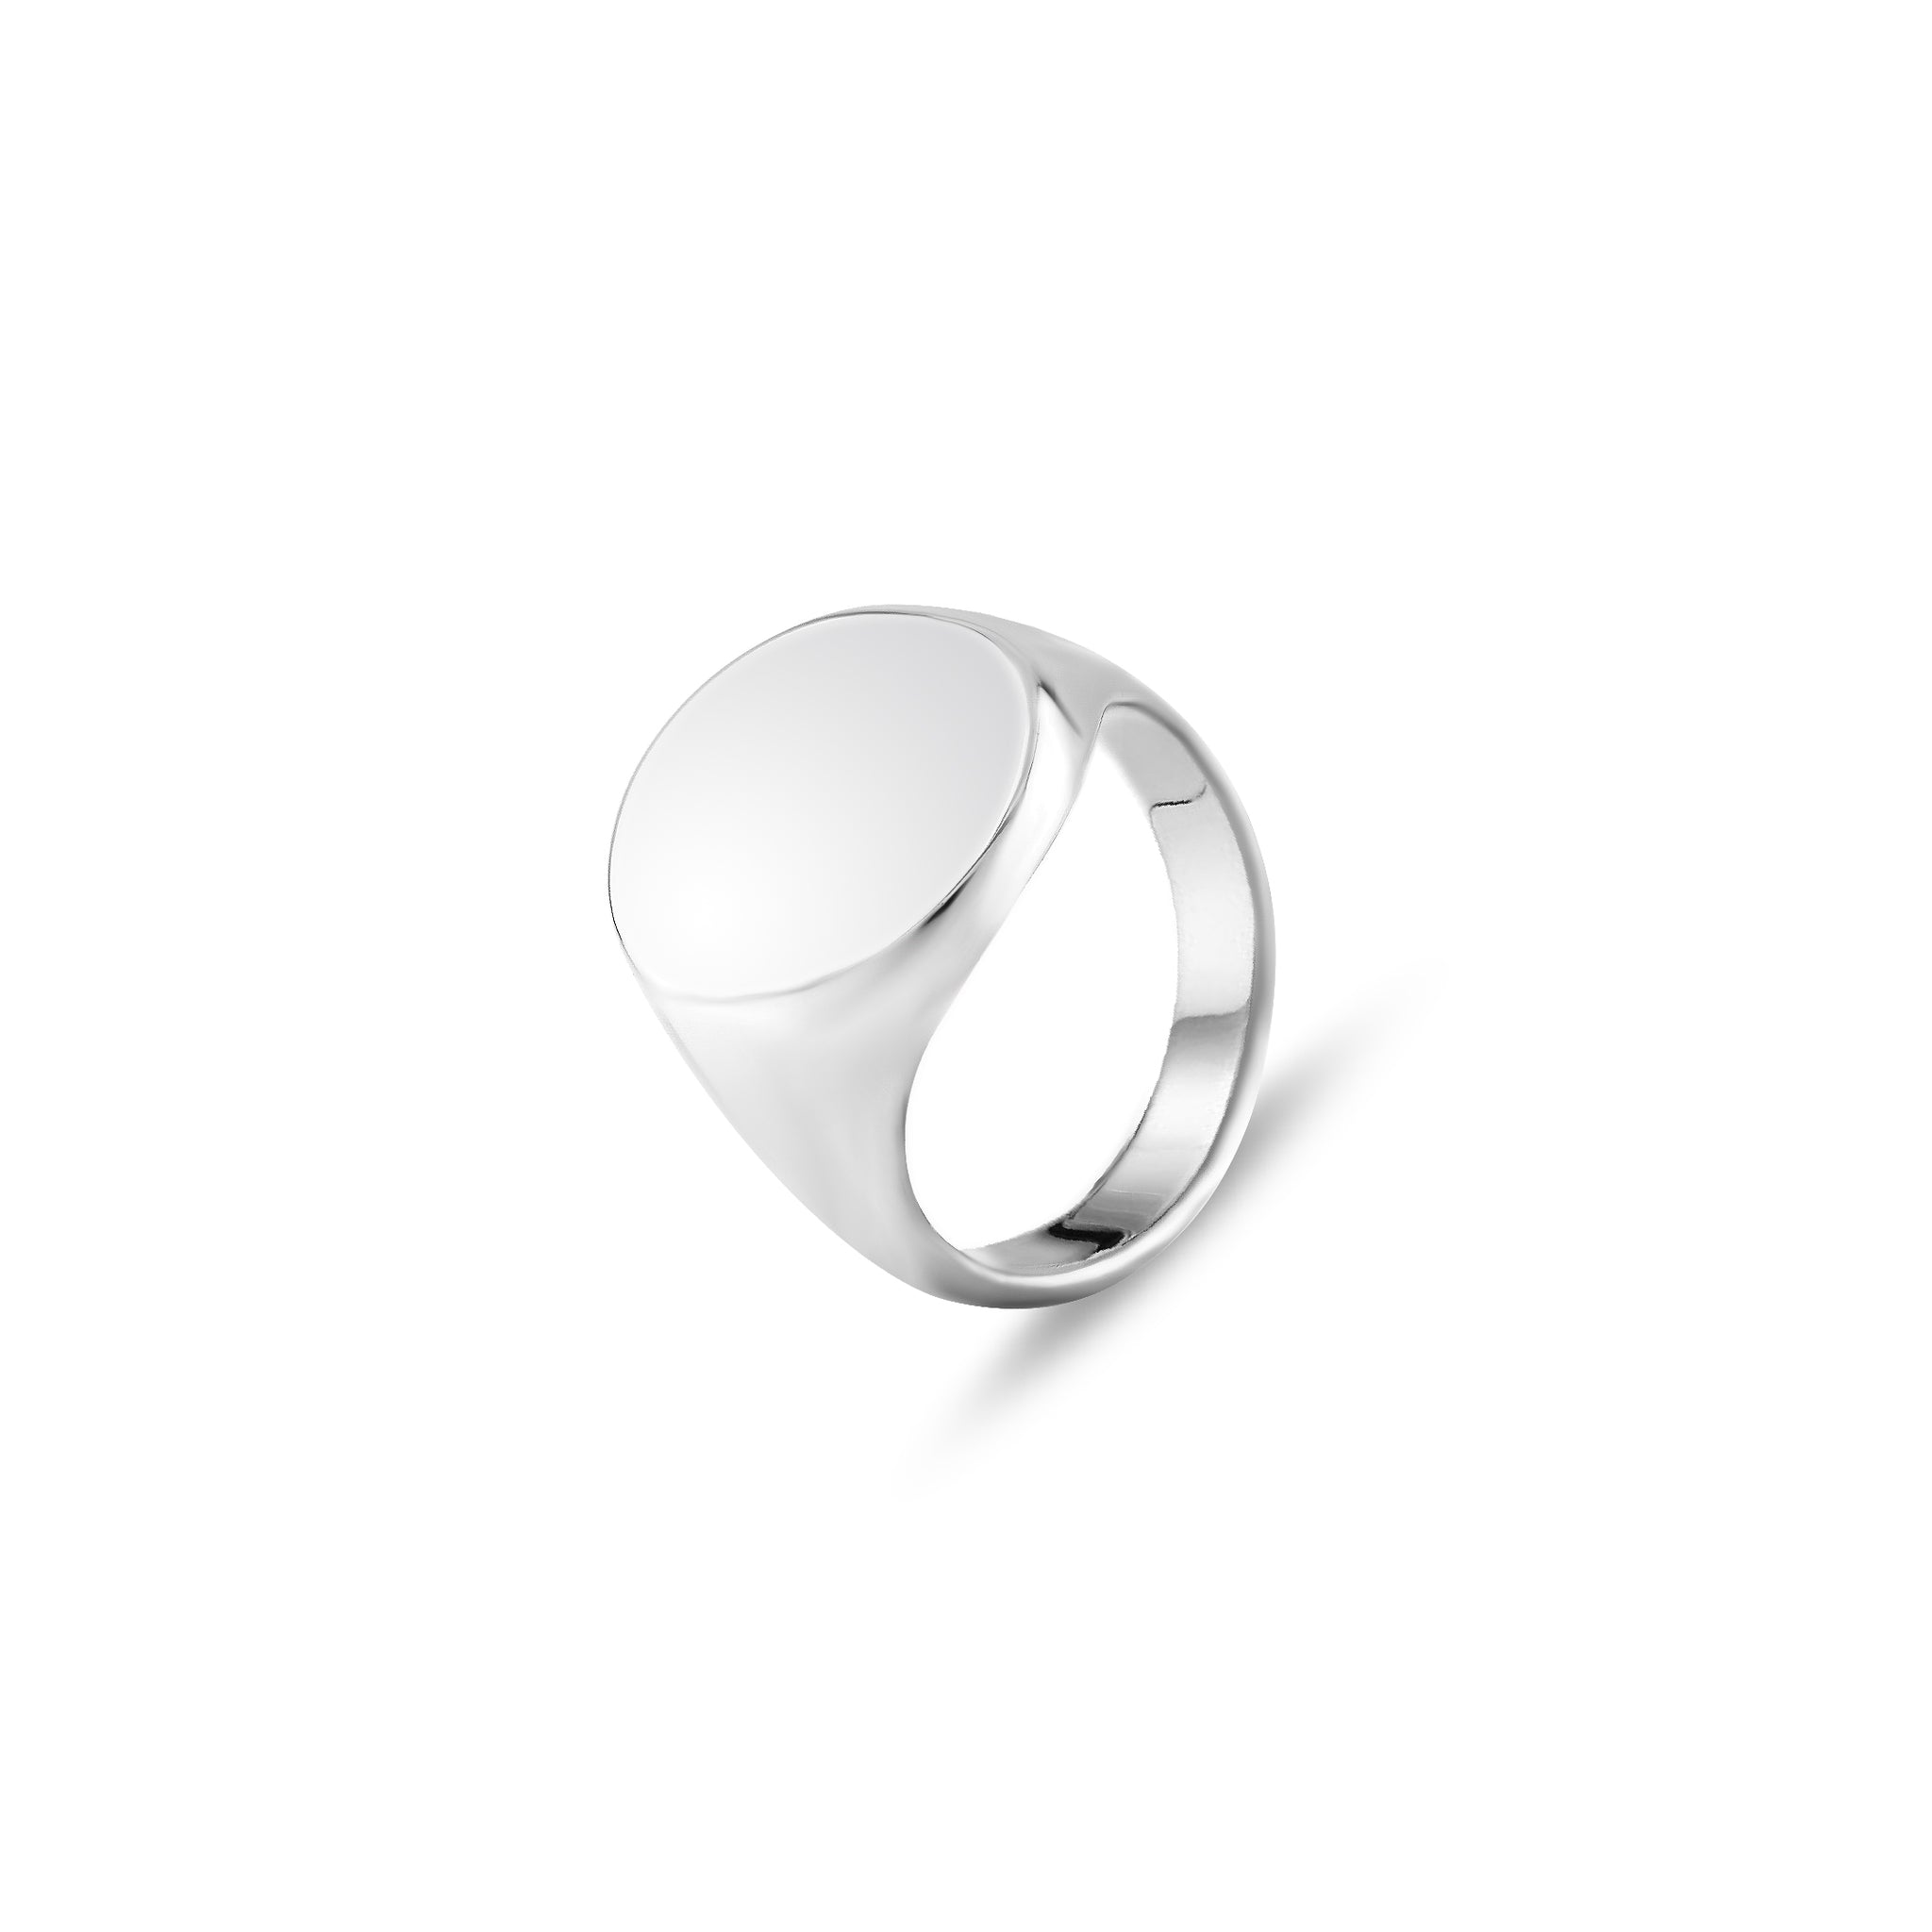 9ct White Gold 20 x 16mm Oval Signet Ring